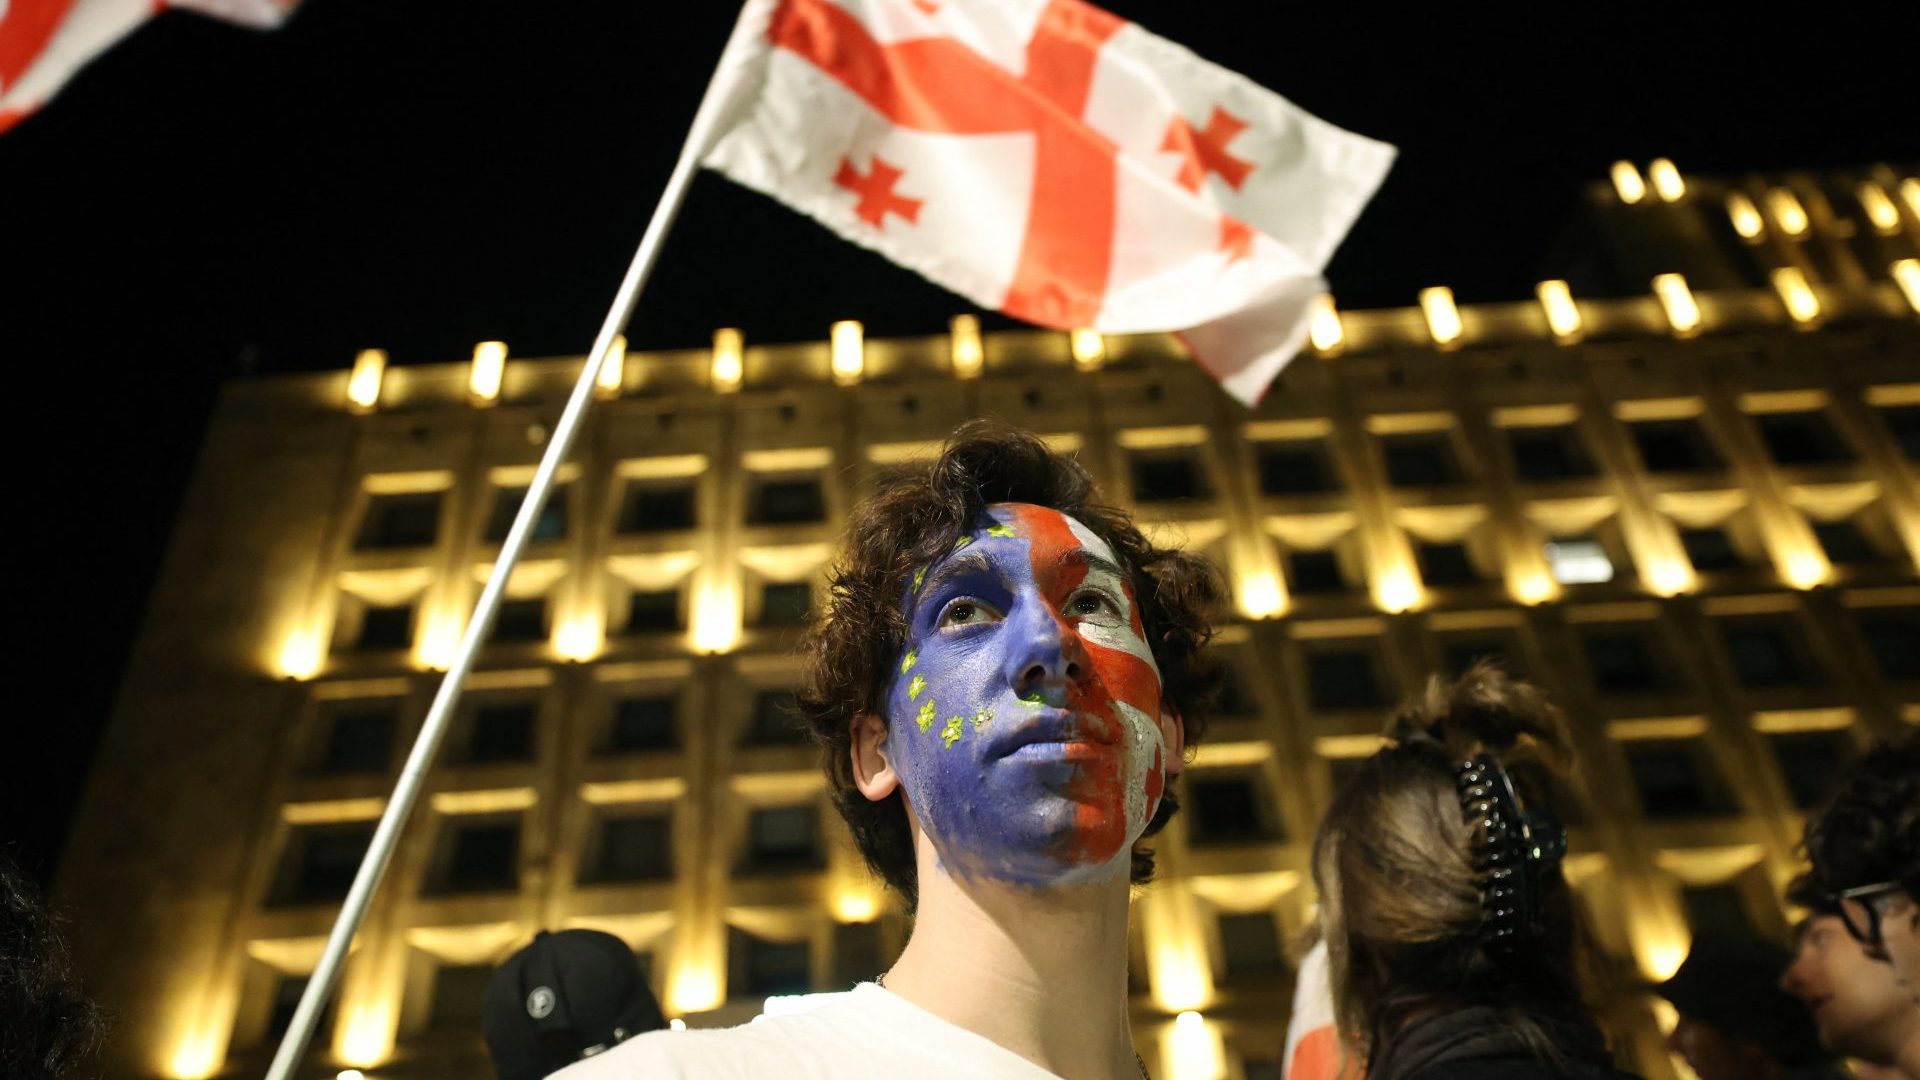 People protest in Tbilisi against a draft bill on ‘foreign influence’ that opponents say will undermine Georgia’s European aspirations. Photo: Giorgi Arjevanidze/AFP/Getty